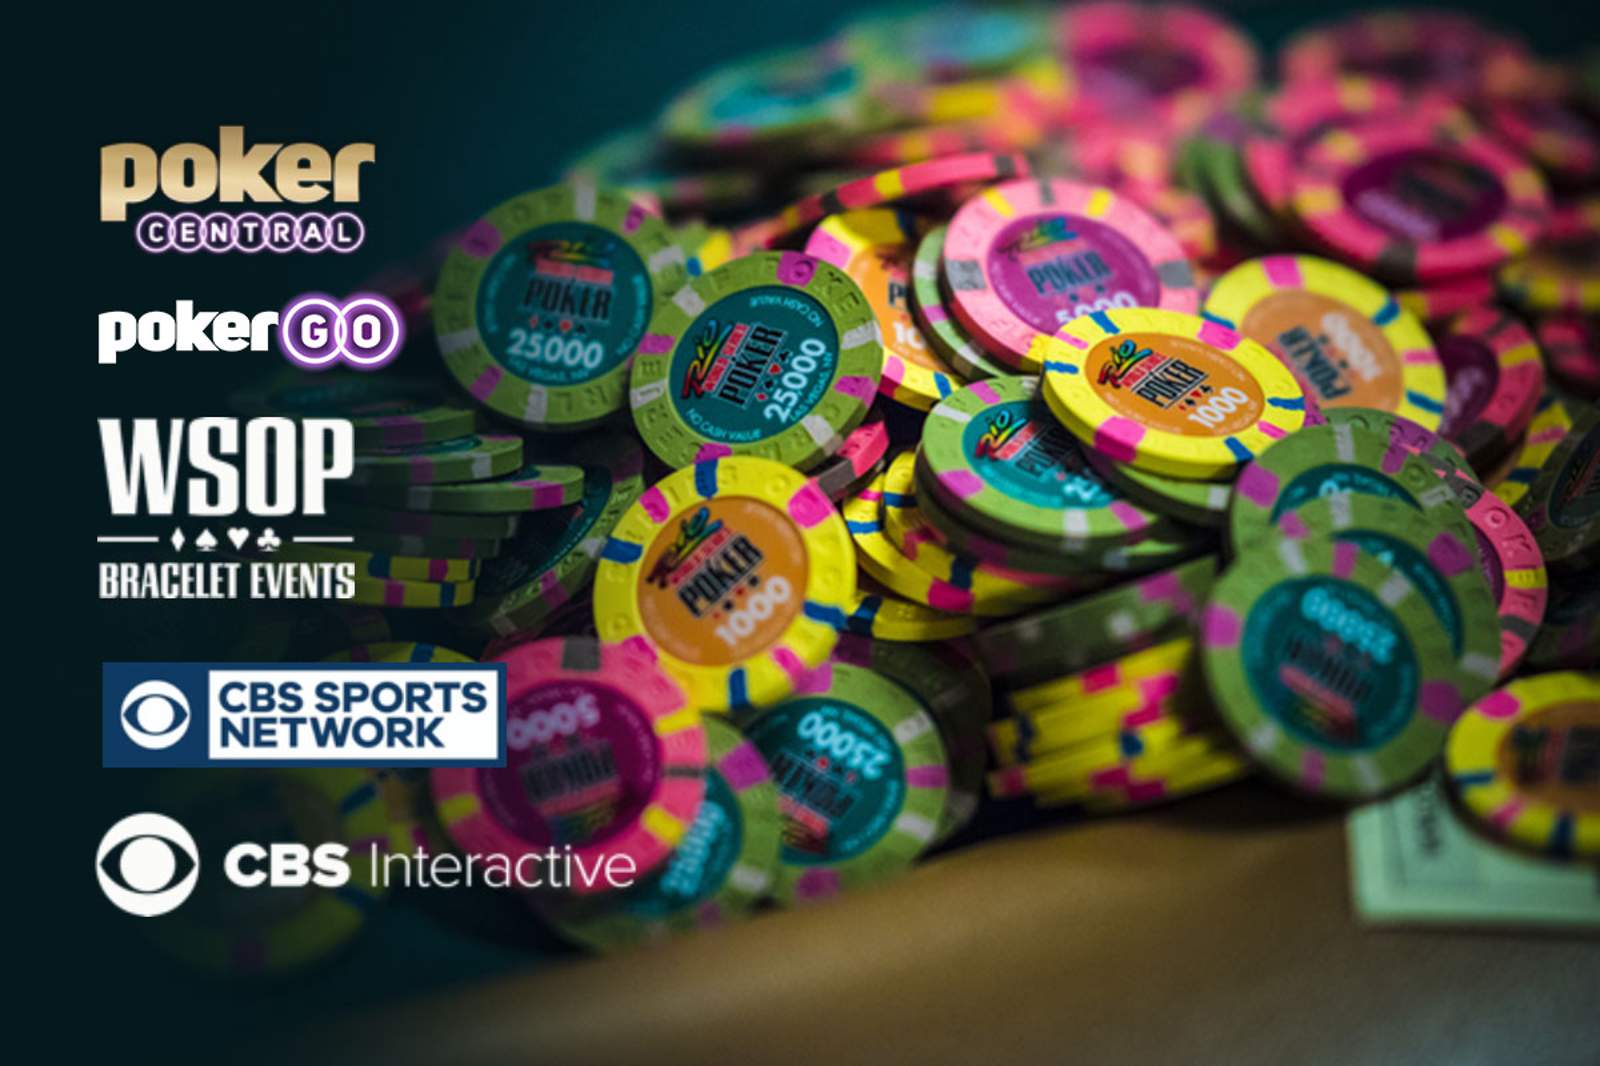 Poker Central and CBS Join Forces to Deliver Unprecedented Coverage of 2019 WSOP Bracelet Events